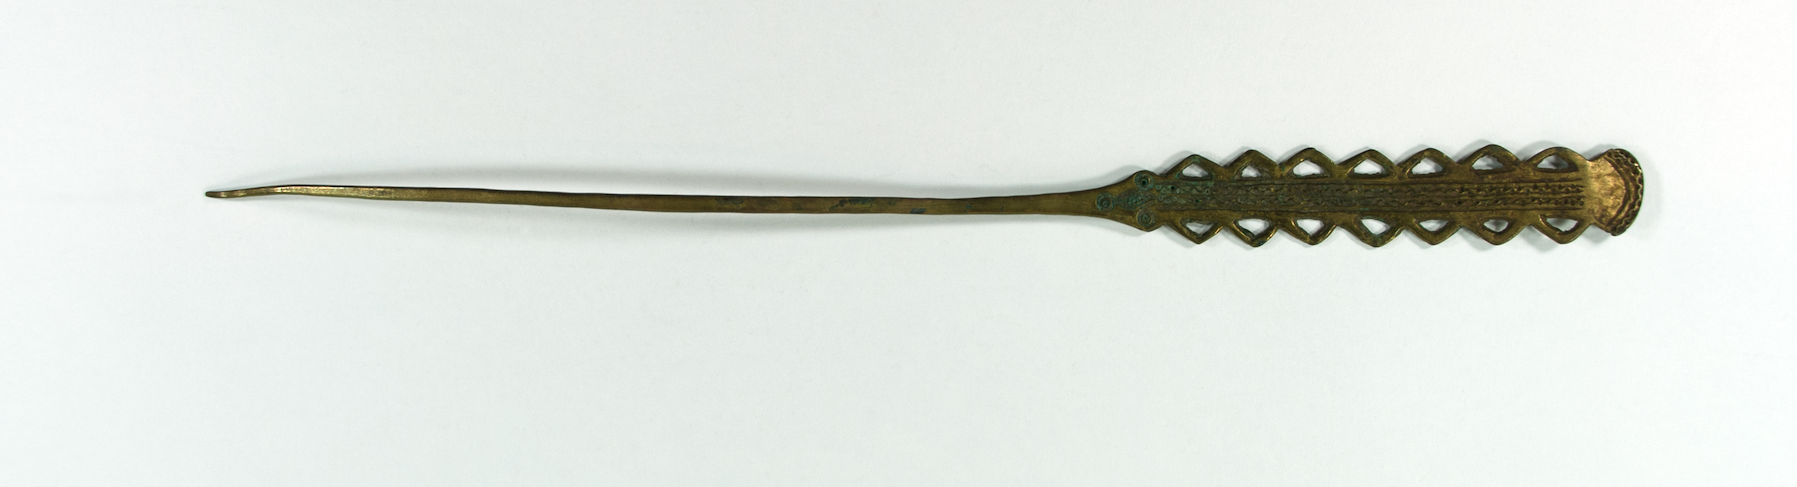  A brass hairpin with jagged edges around the top section. The jagged protrusions have negative triangular spaces within.